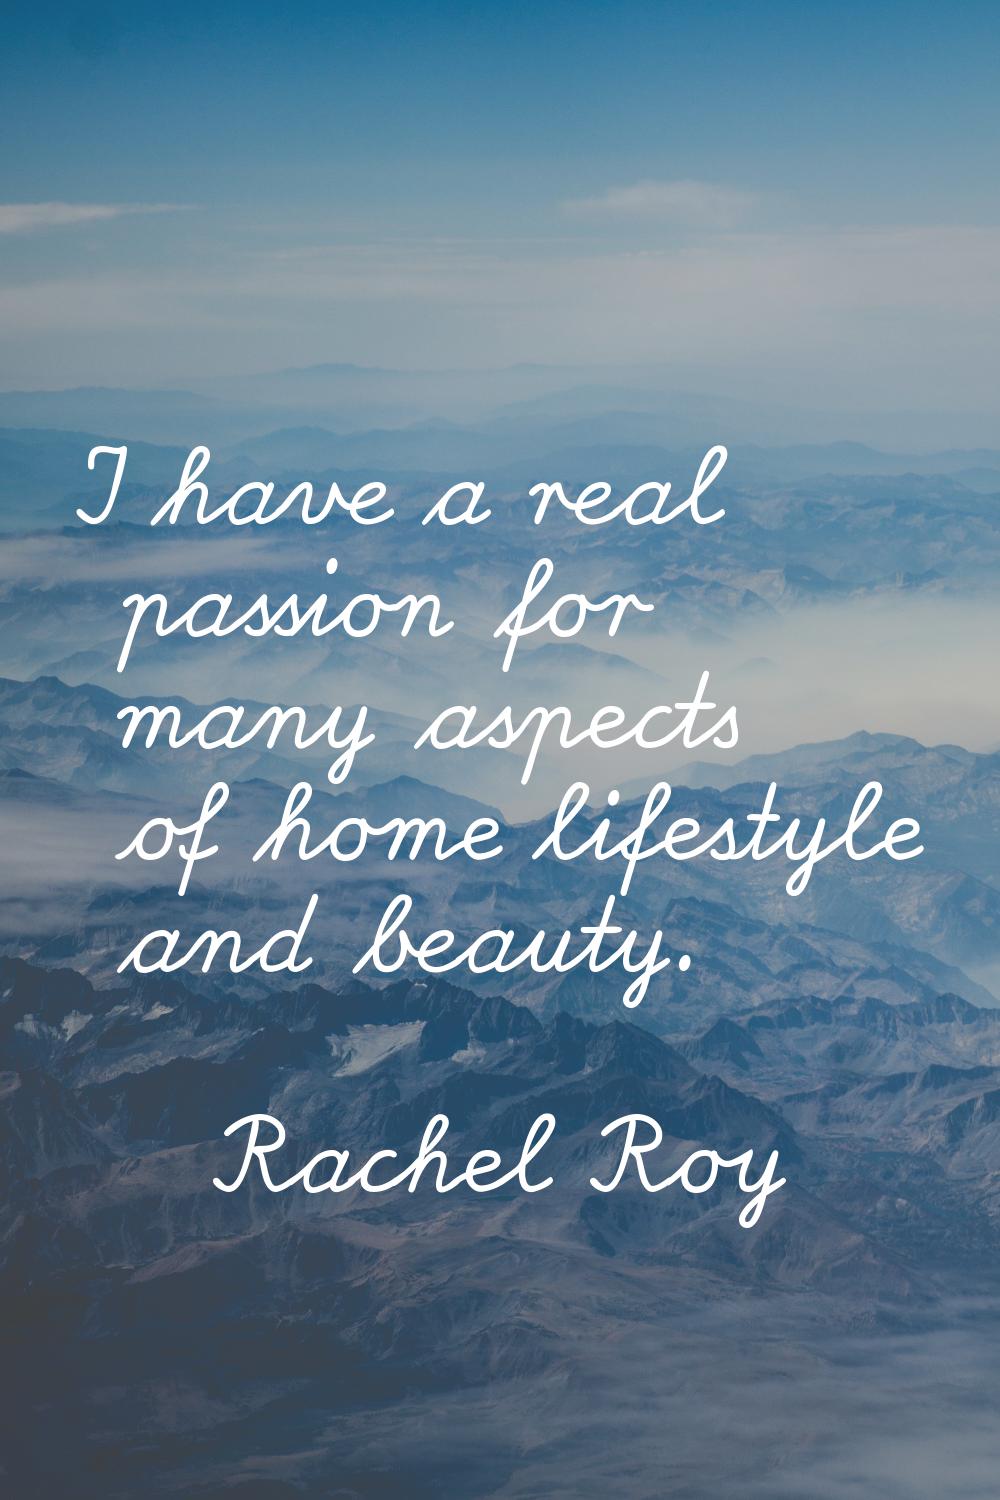 I have a real passion for many aspects of home lifestyle and beauty.